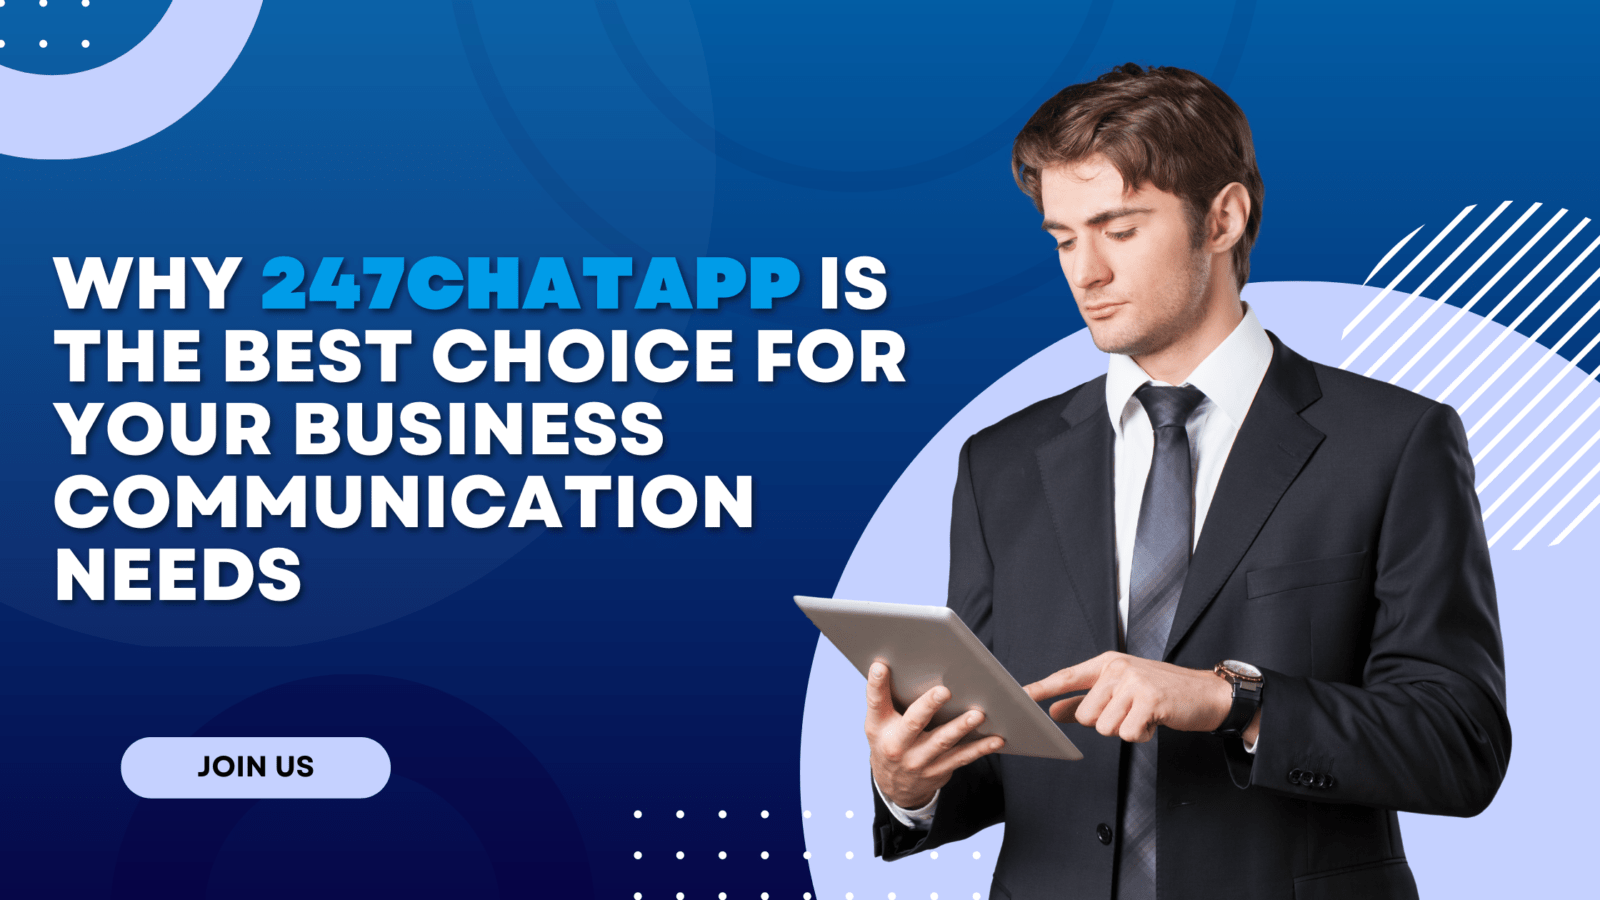 Why 247ChatApp is the Best Choice for Your Business Communication Needs